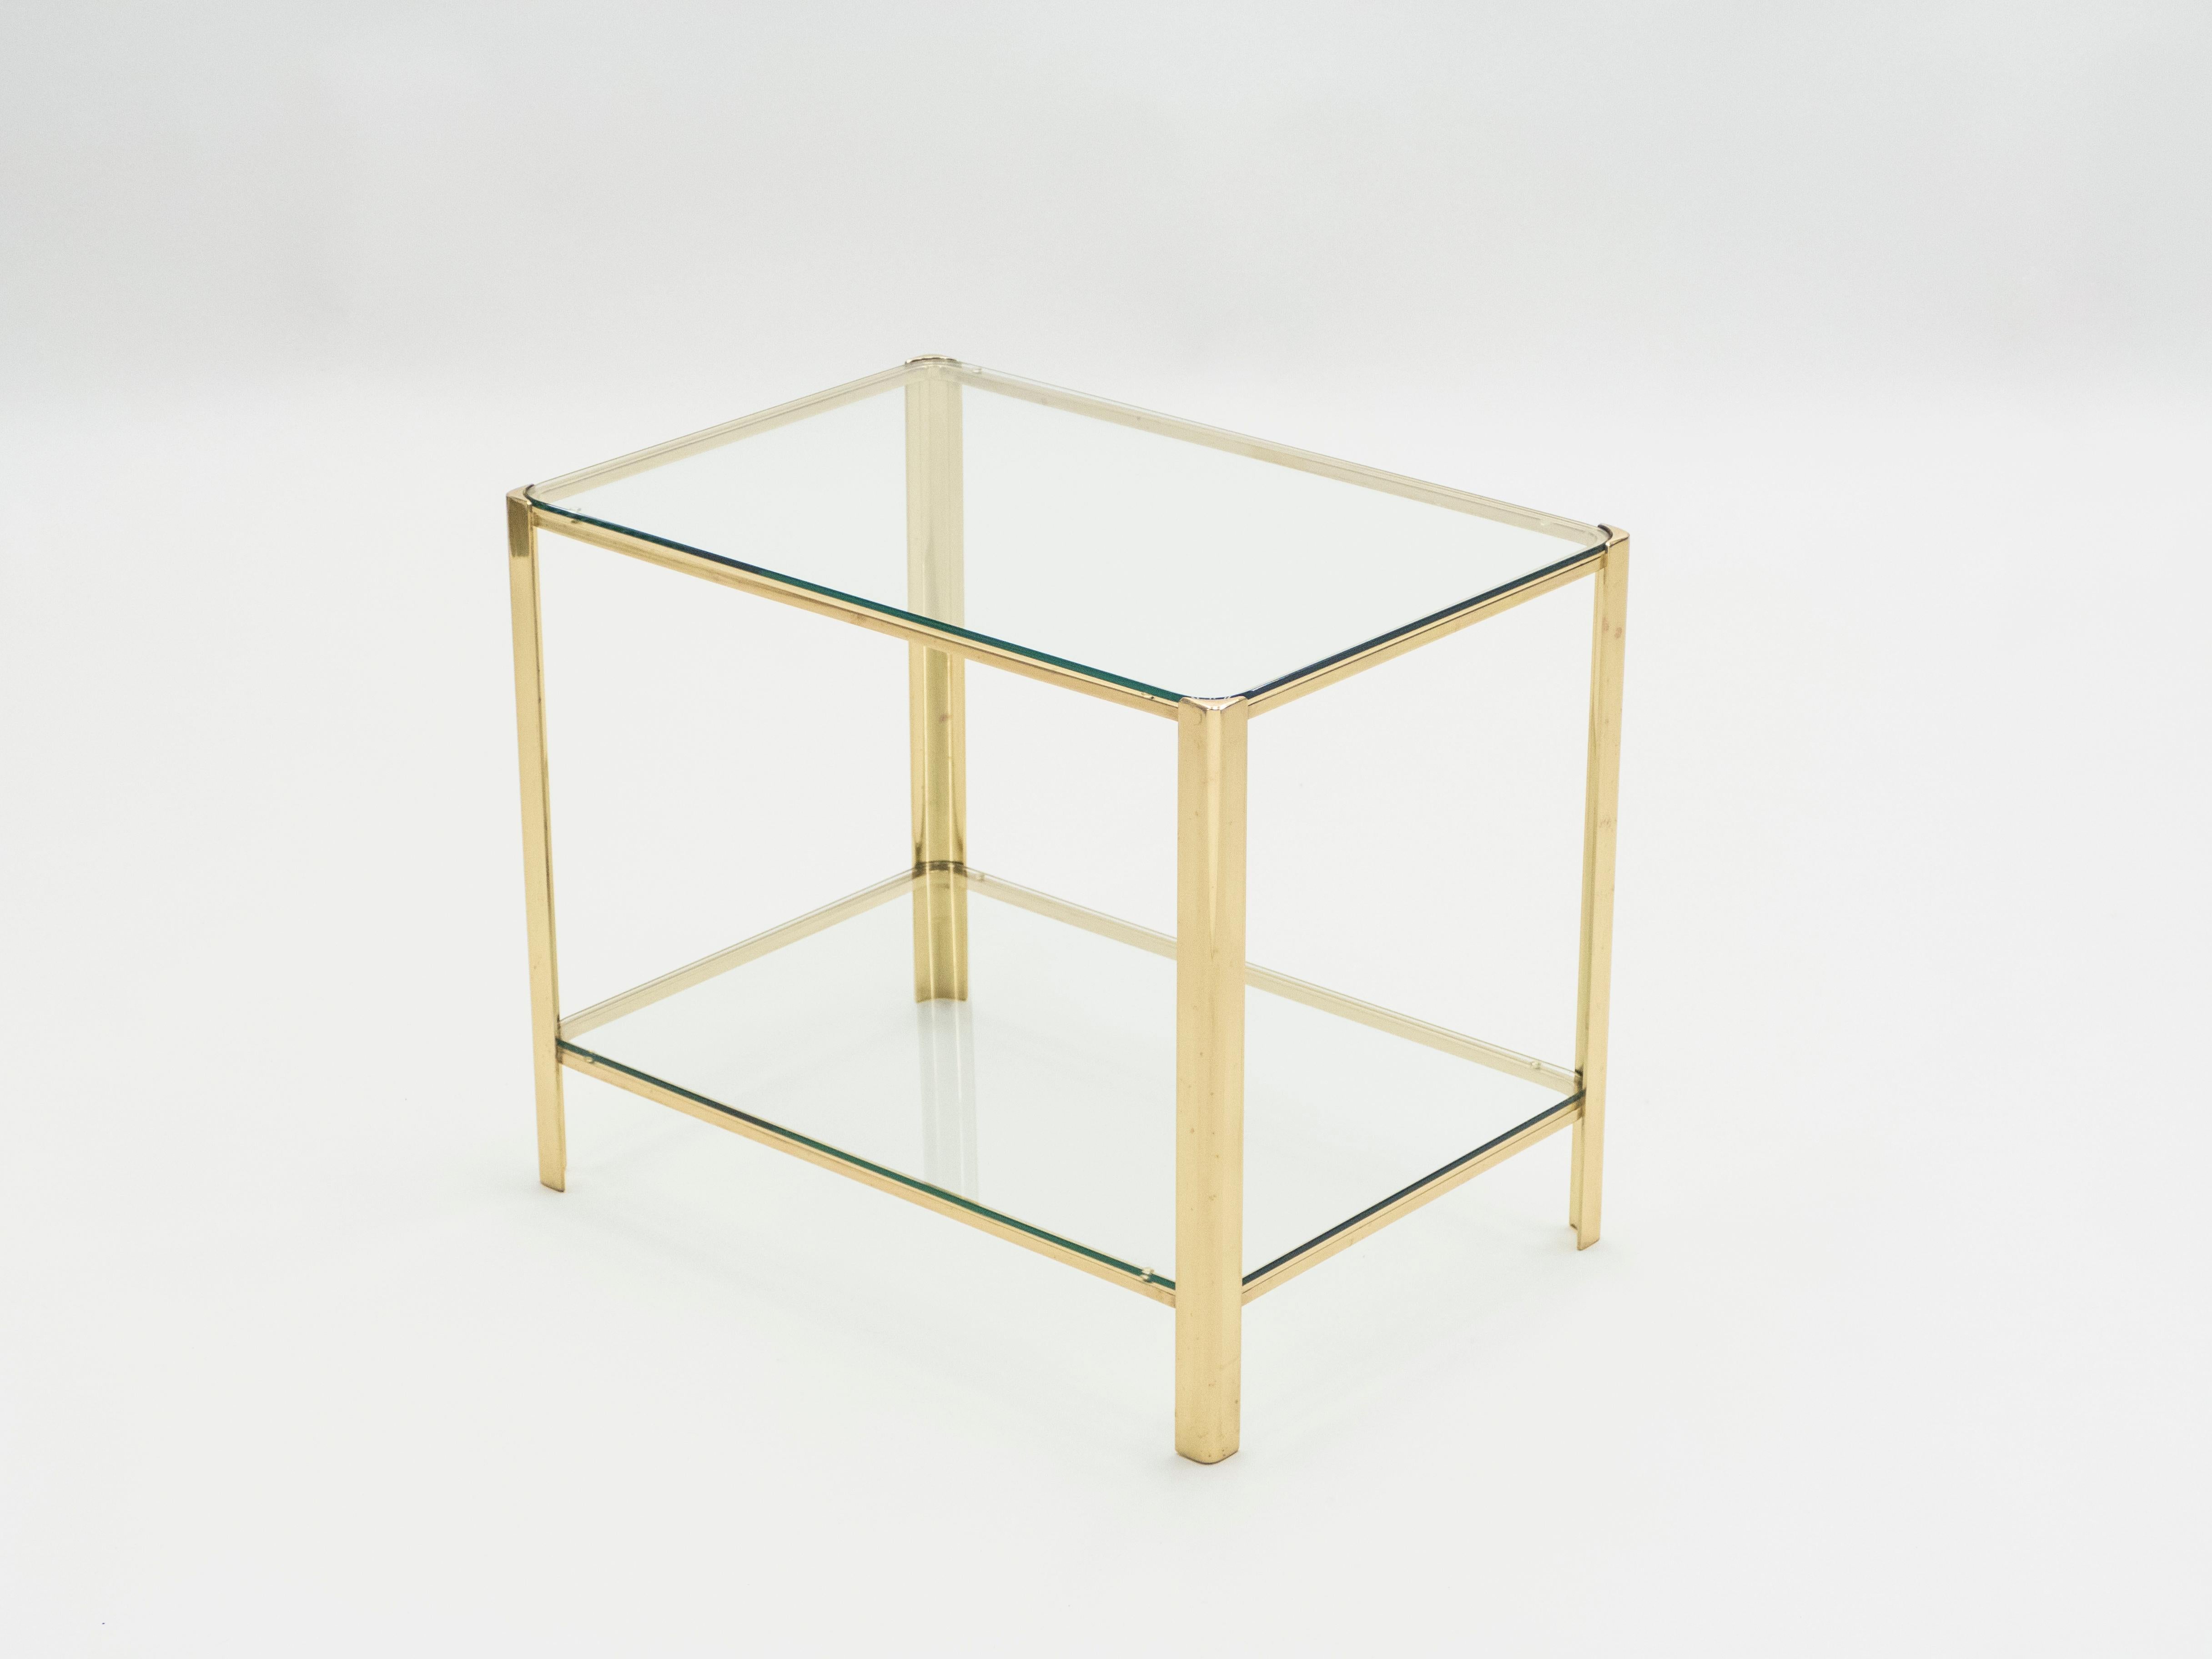 This occasional and side table signed by Jacques Quinet and stamped by Broncz, is a remarkable find. It features a strong, bronze base constructed to last. The 2/3 glass top adds extra storage space as well as aesthetic appeal. This end table will